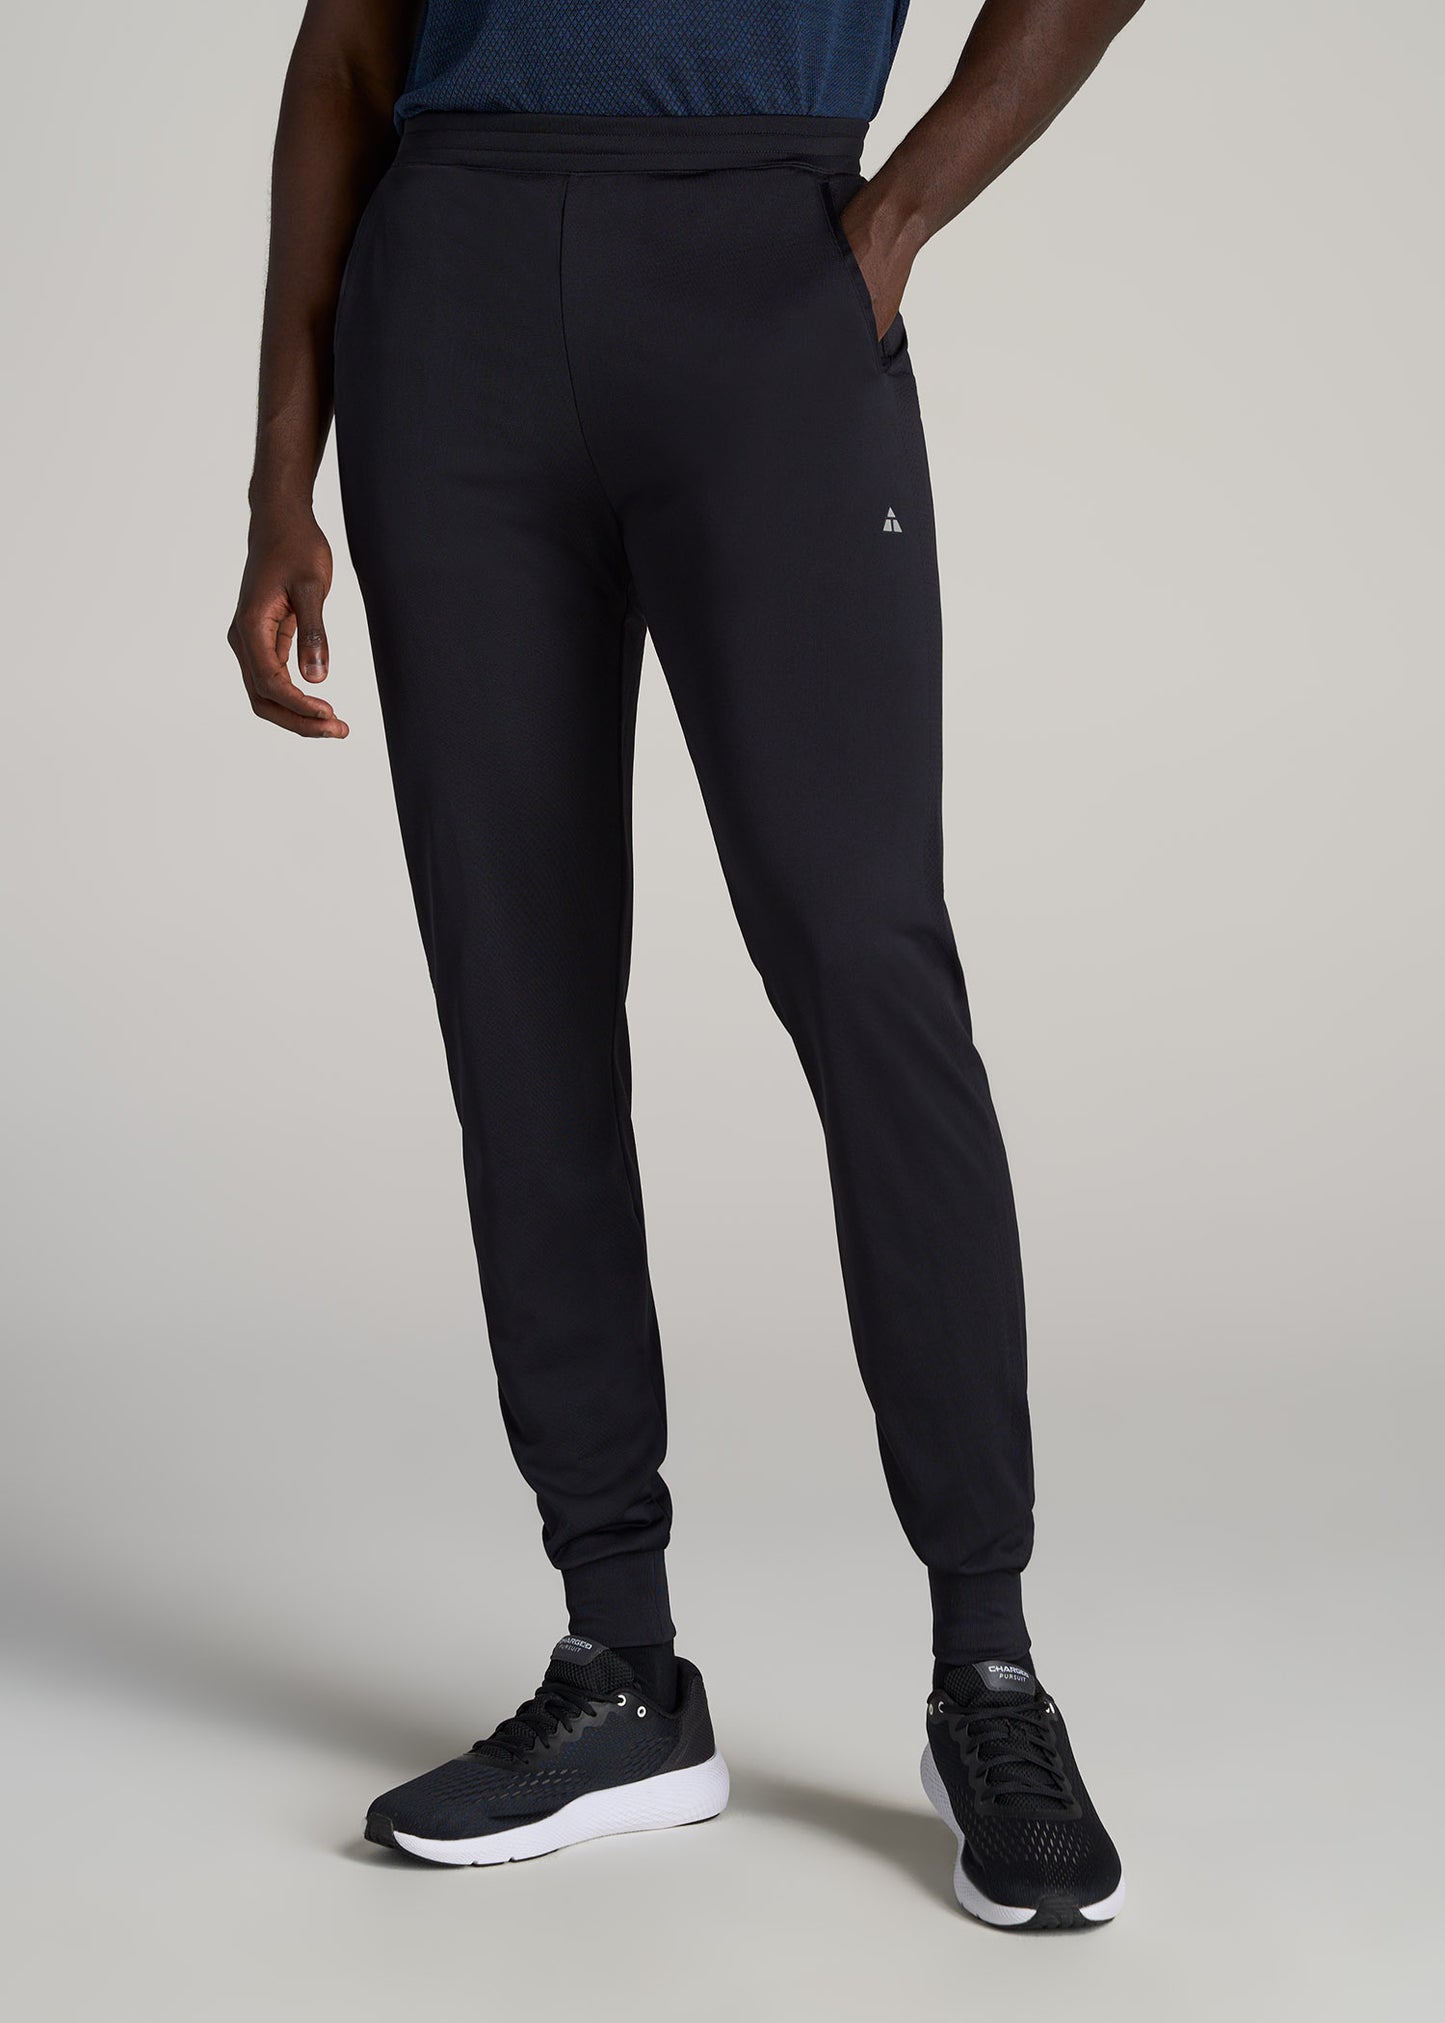 Tall Mens Jogging Bottoms, Sizes LT - 4XLT, Open and Cuff Bottom Styles